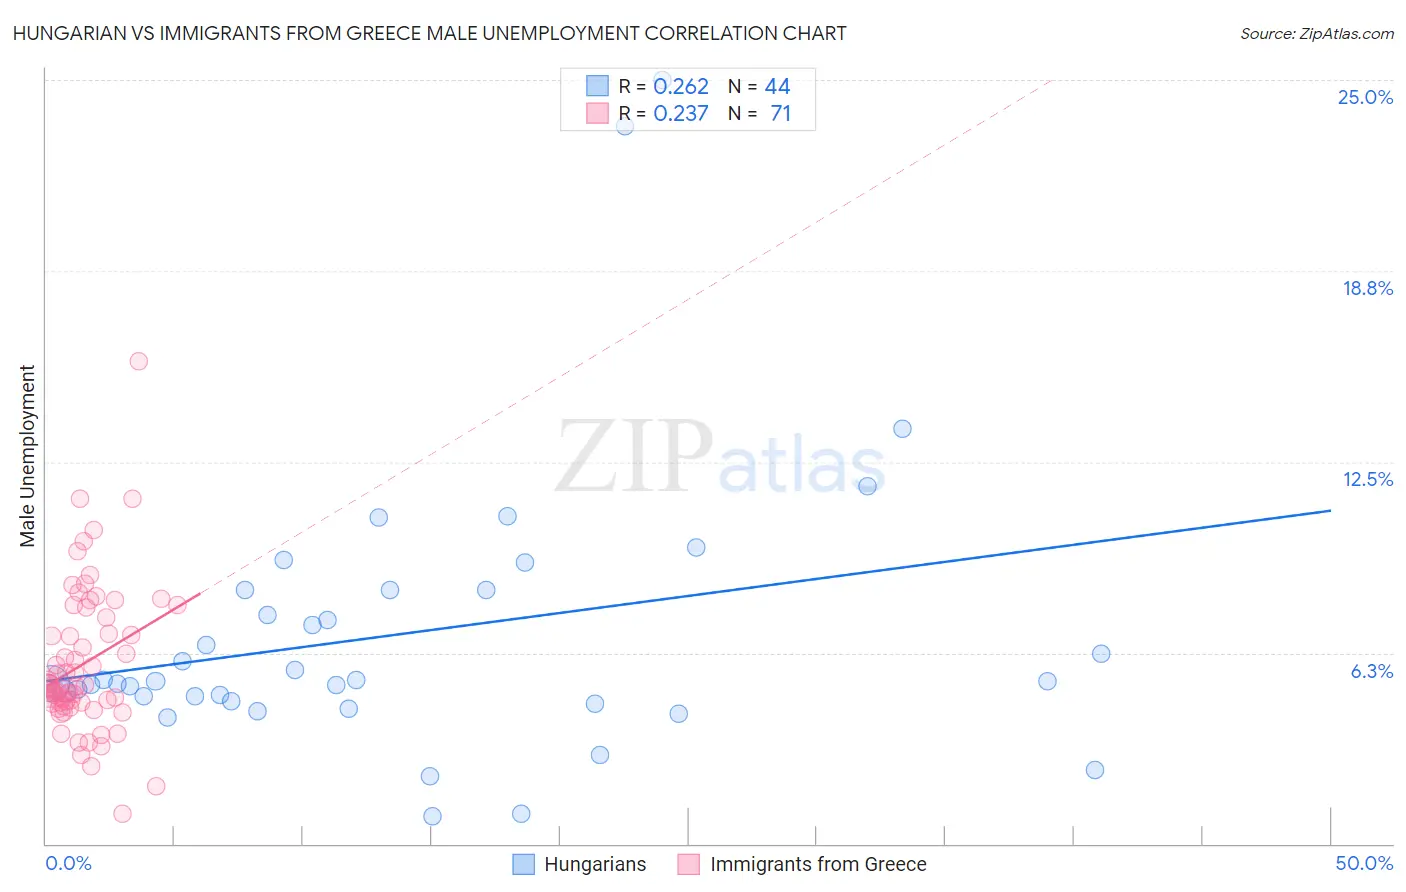 Hungarian vs Immigrants from Greece Male Unemployment